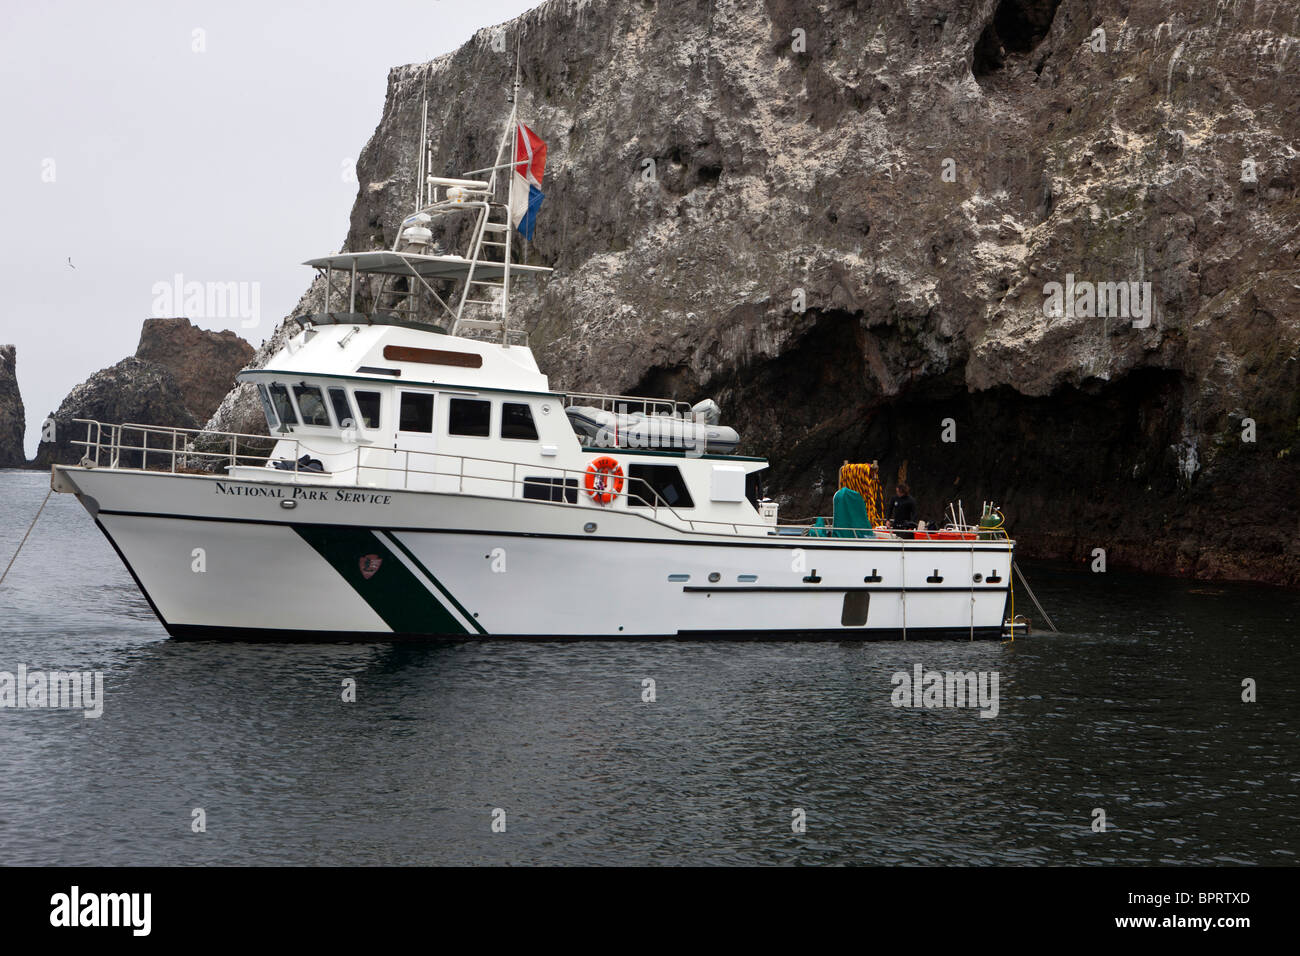 National Park Service research diving boat Sea Ranger II, Anacapa Island, Channel Islands National Park, California Stock Photo